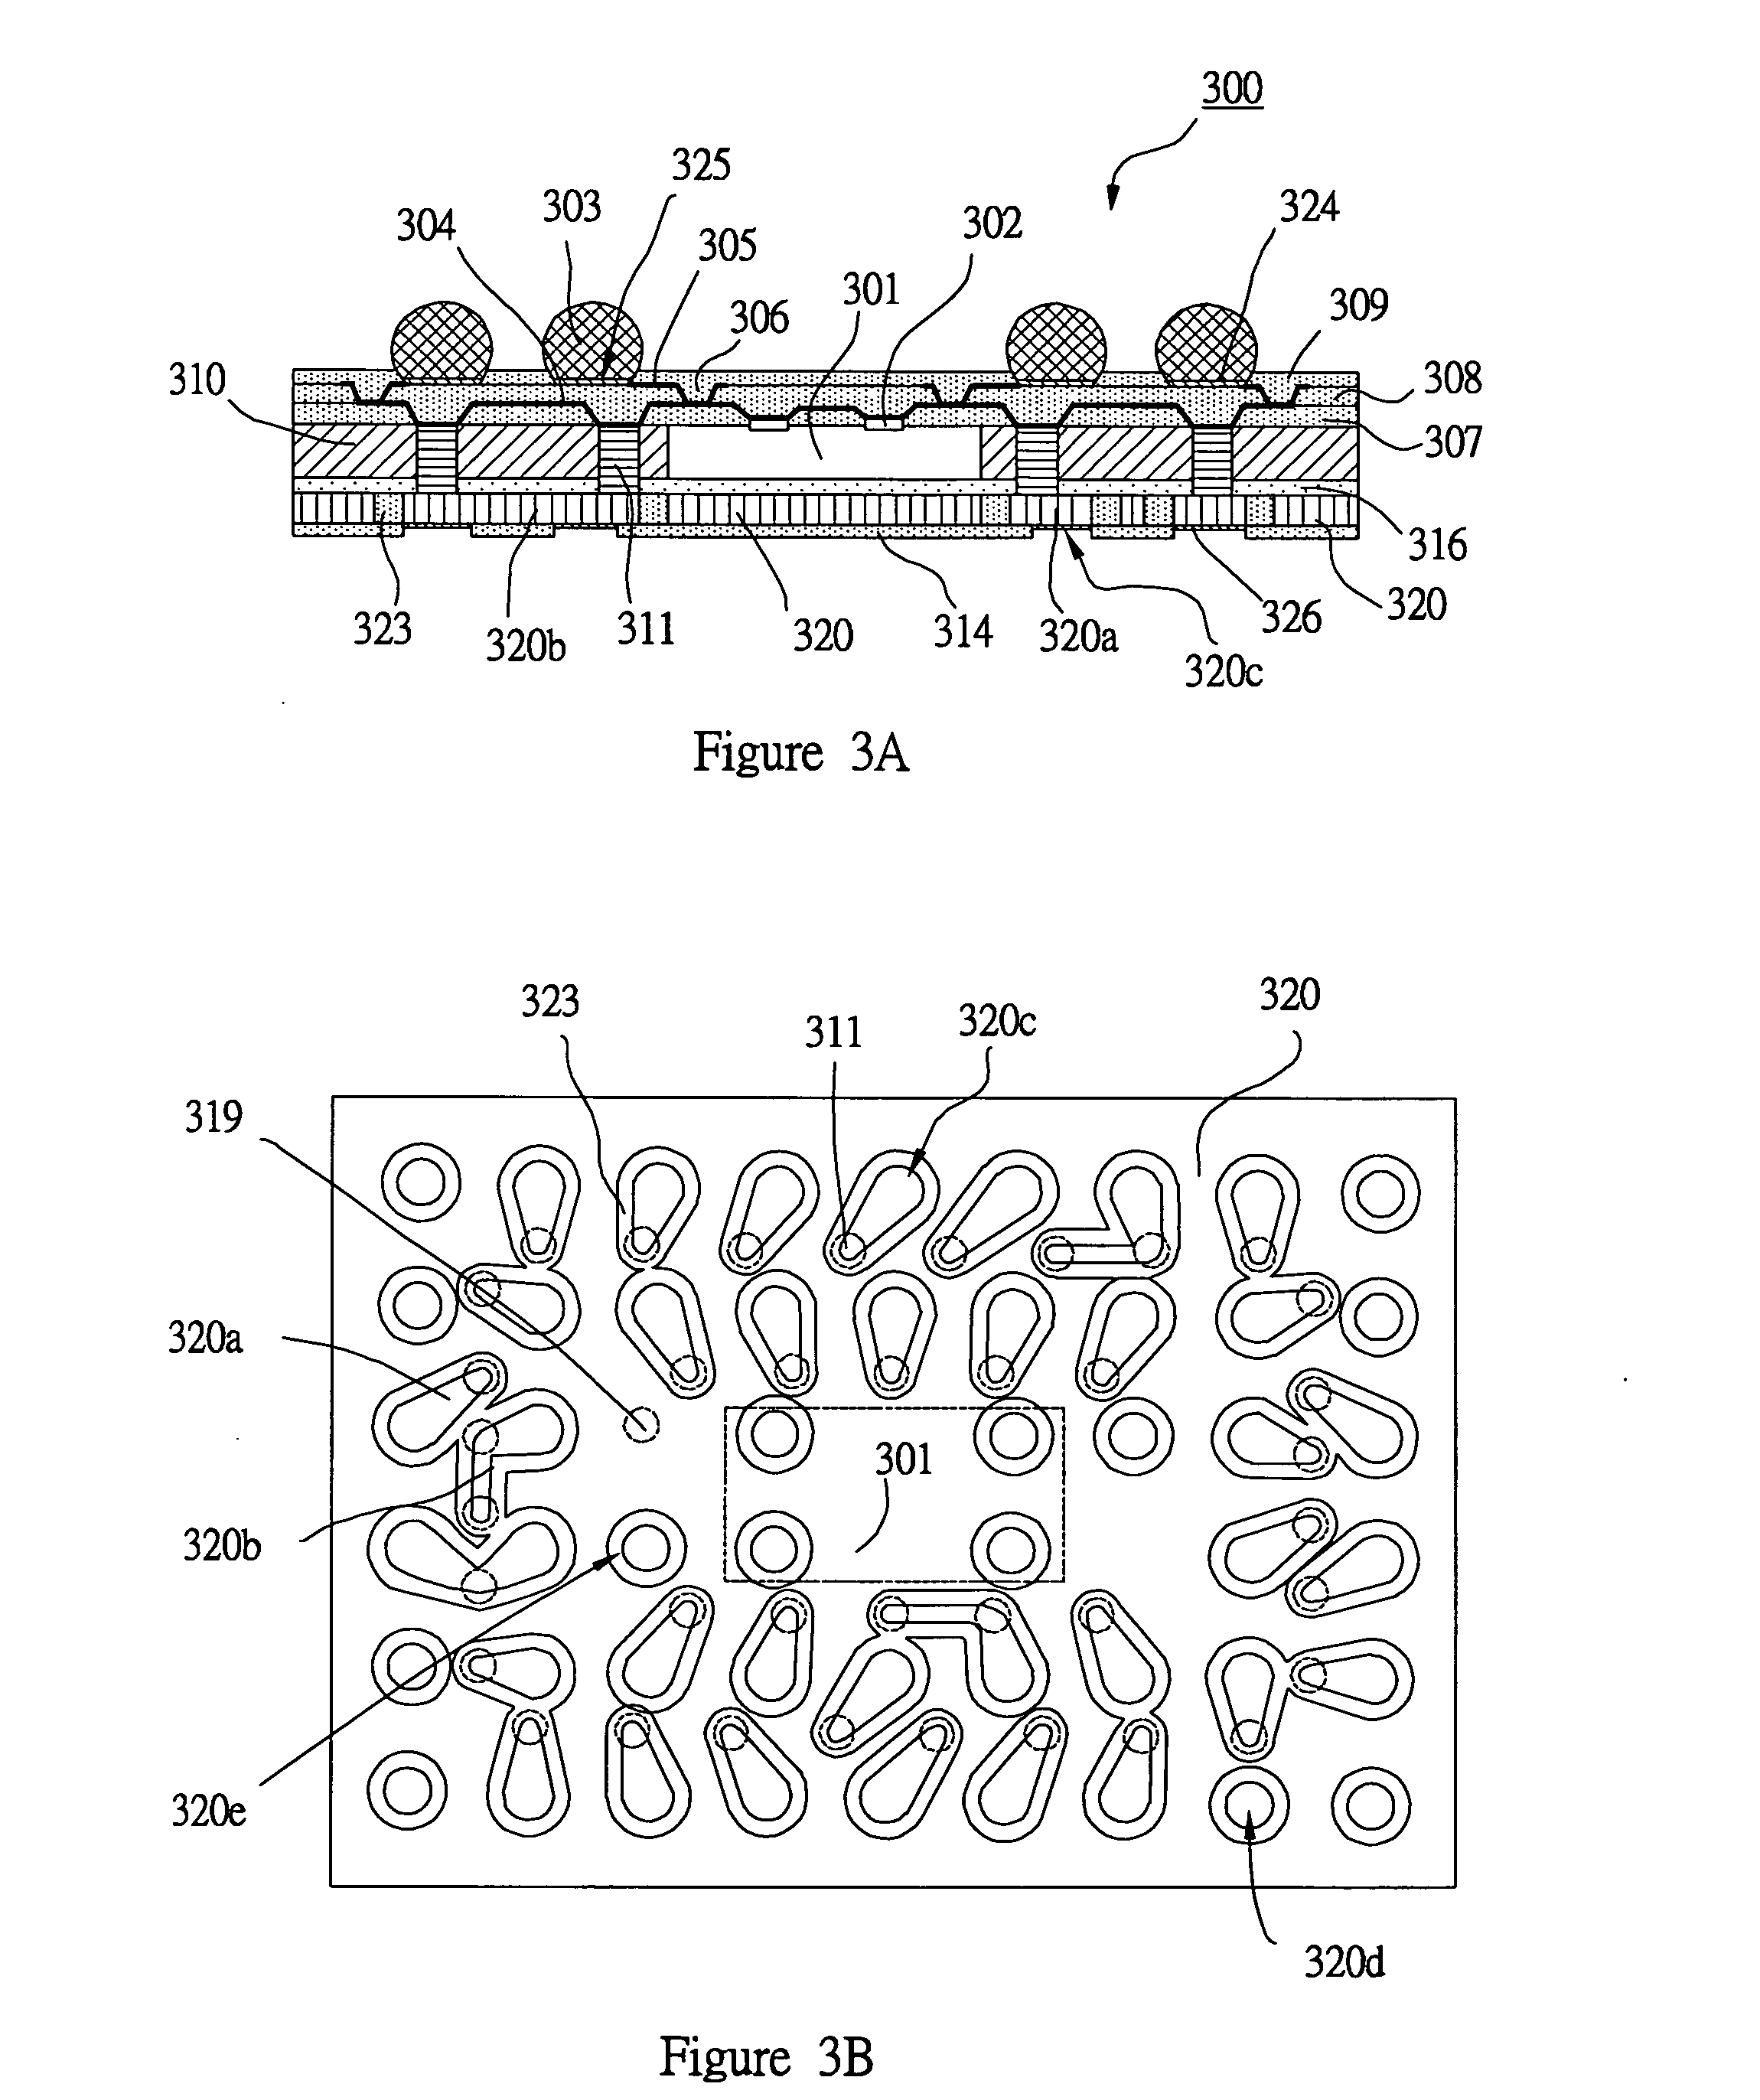 3D electronic packaging structure having a conductive support substrate